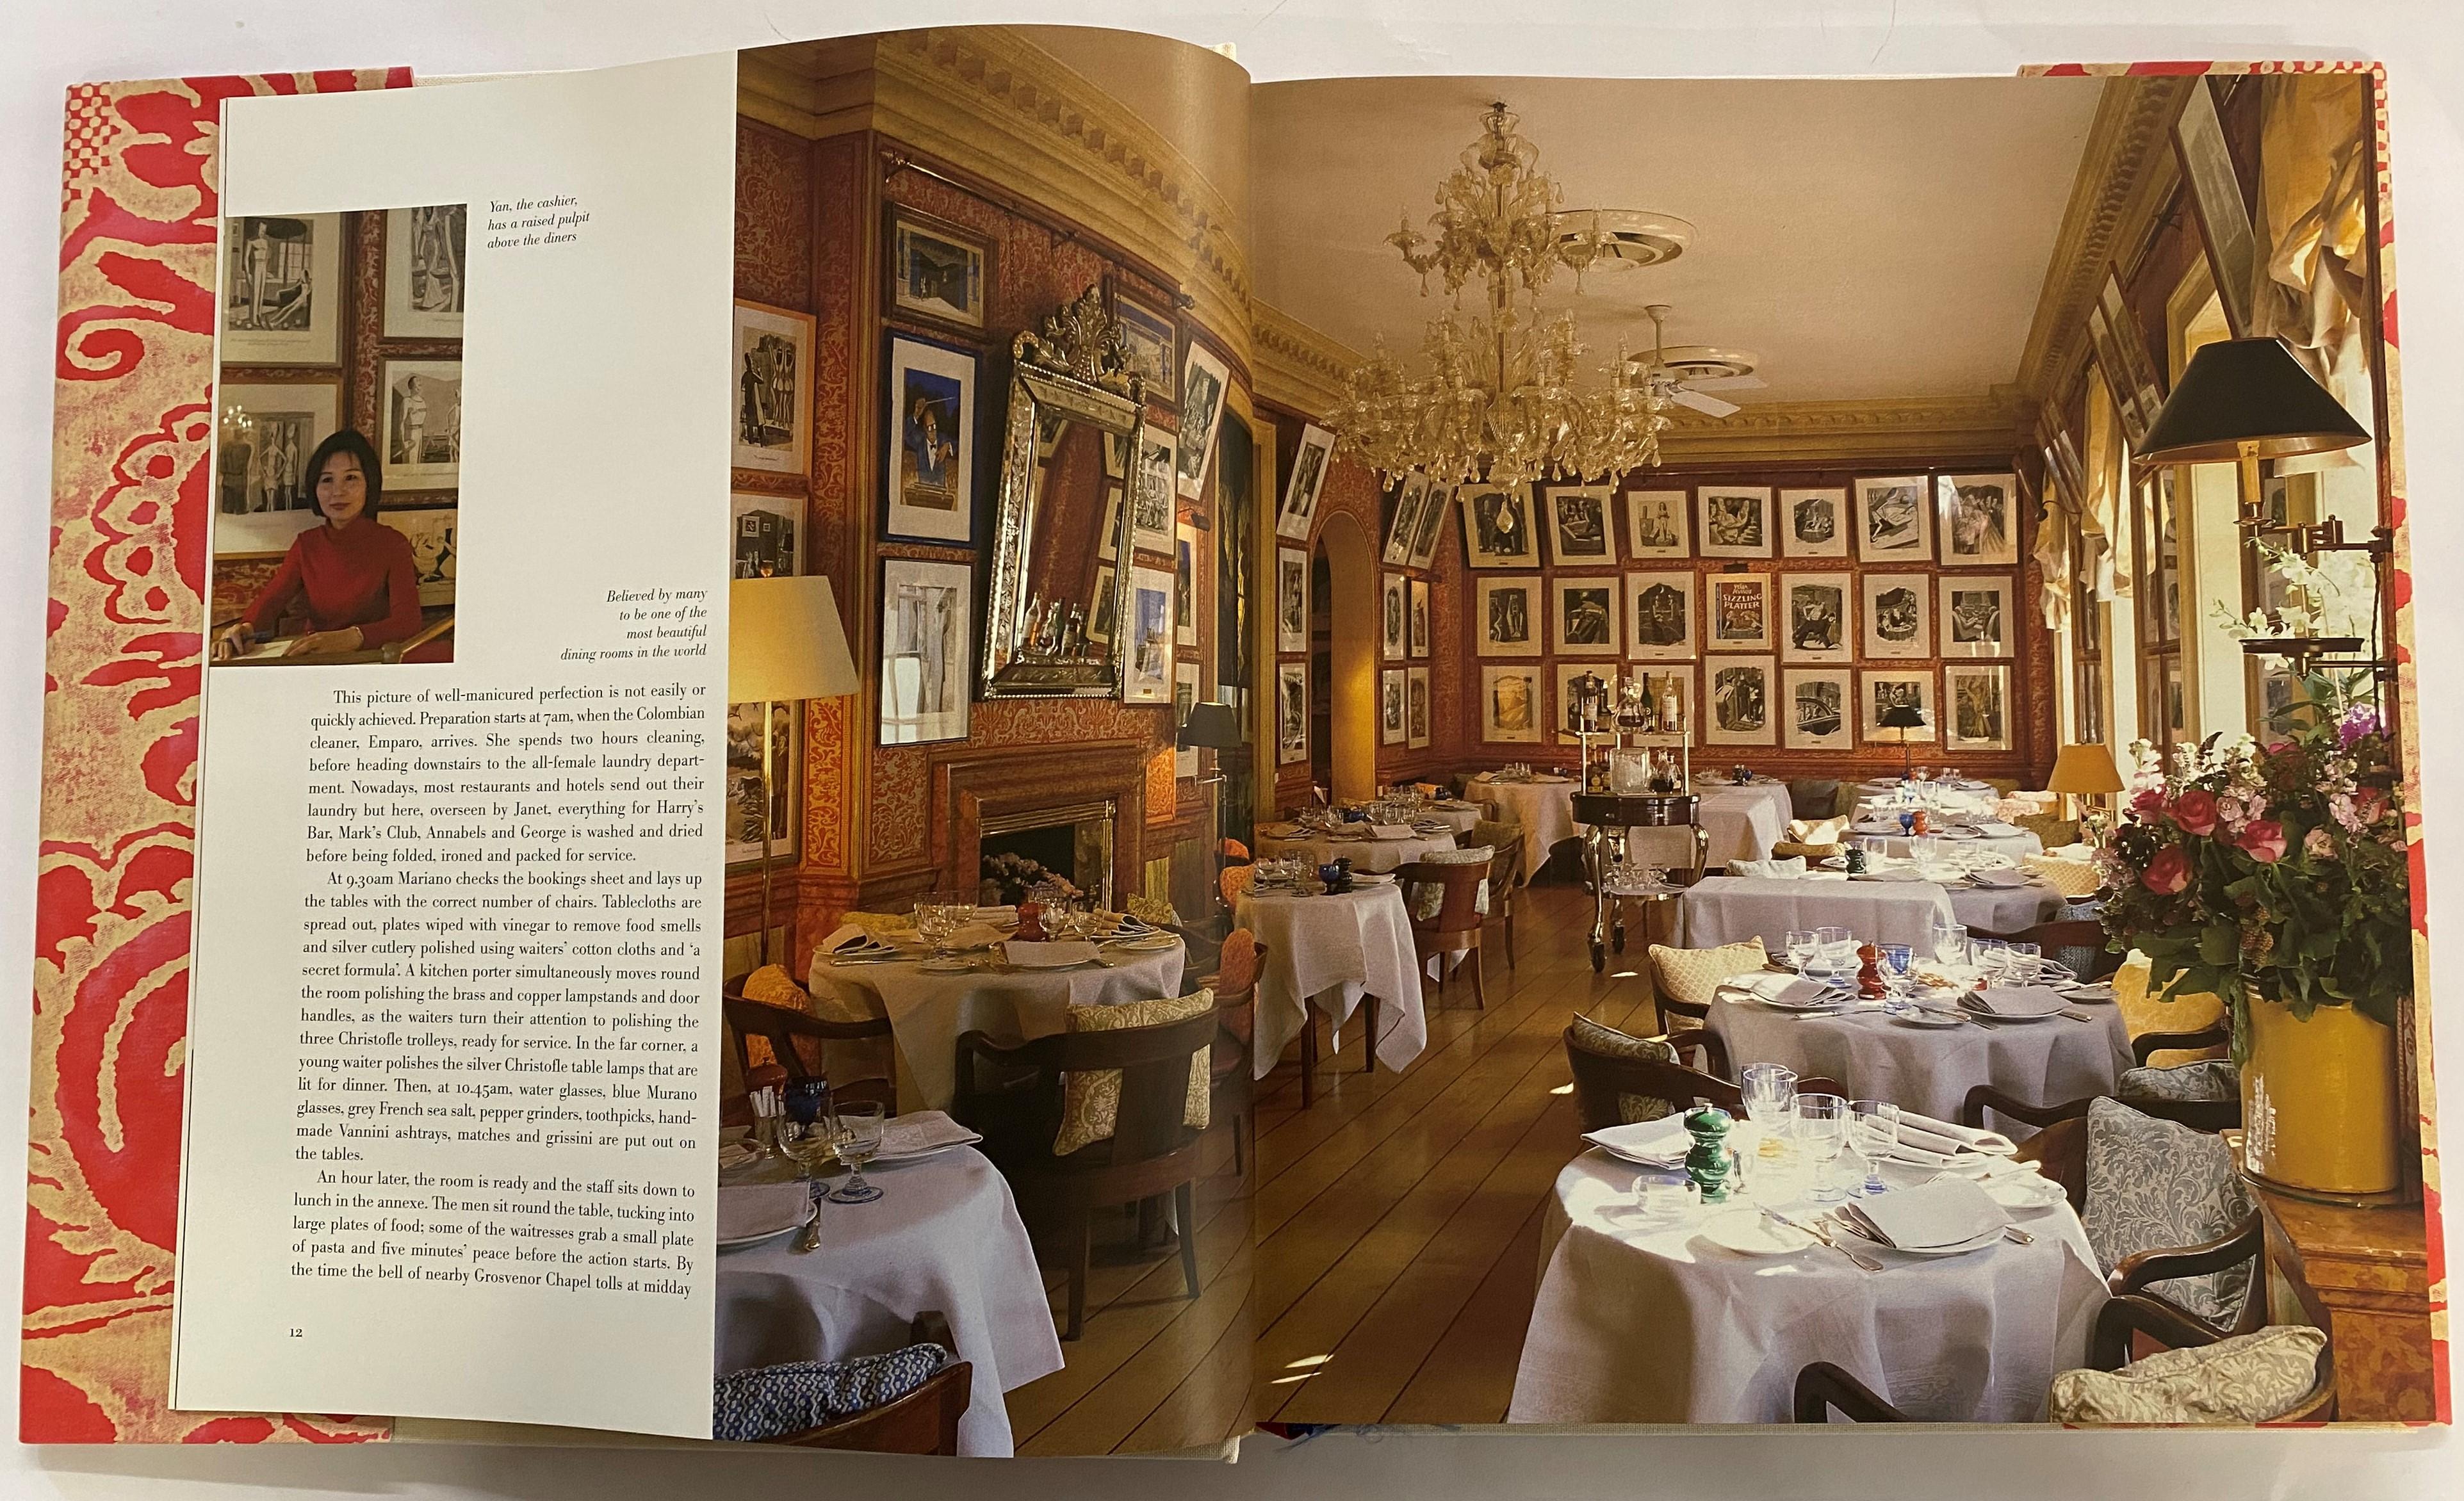 This is a very fine copy of this privately produced publication which was originally intended to be only for the members of the world famous London private dining club which was set up by Mark Birley. The book comes in the original presentation box